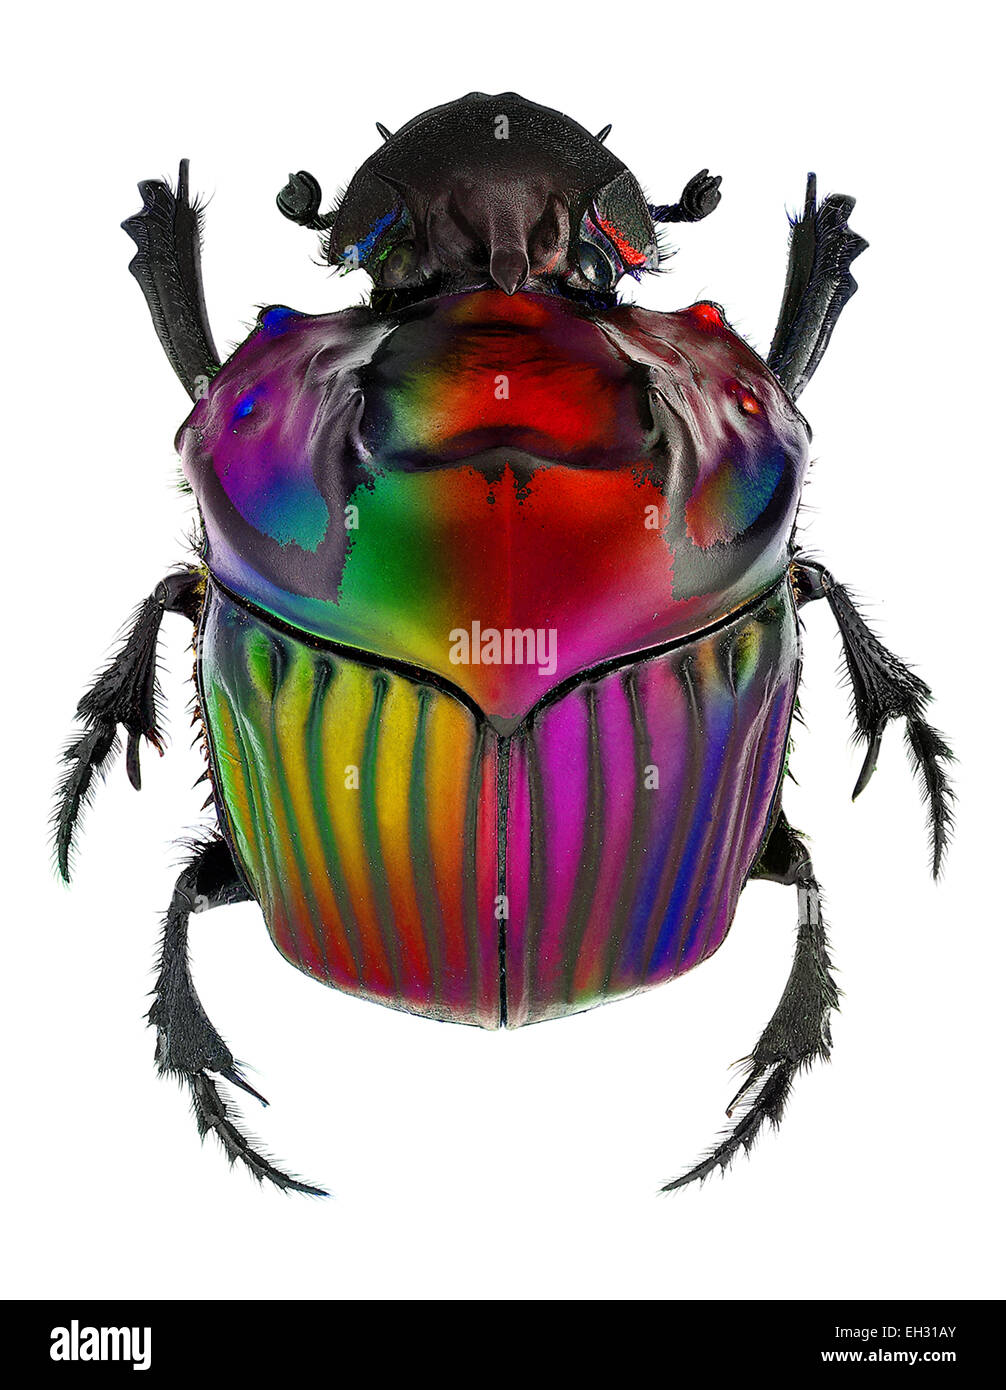 fantasy colors on Oxysternon conspicillatum dung beetle Stock Photo